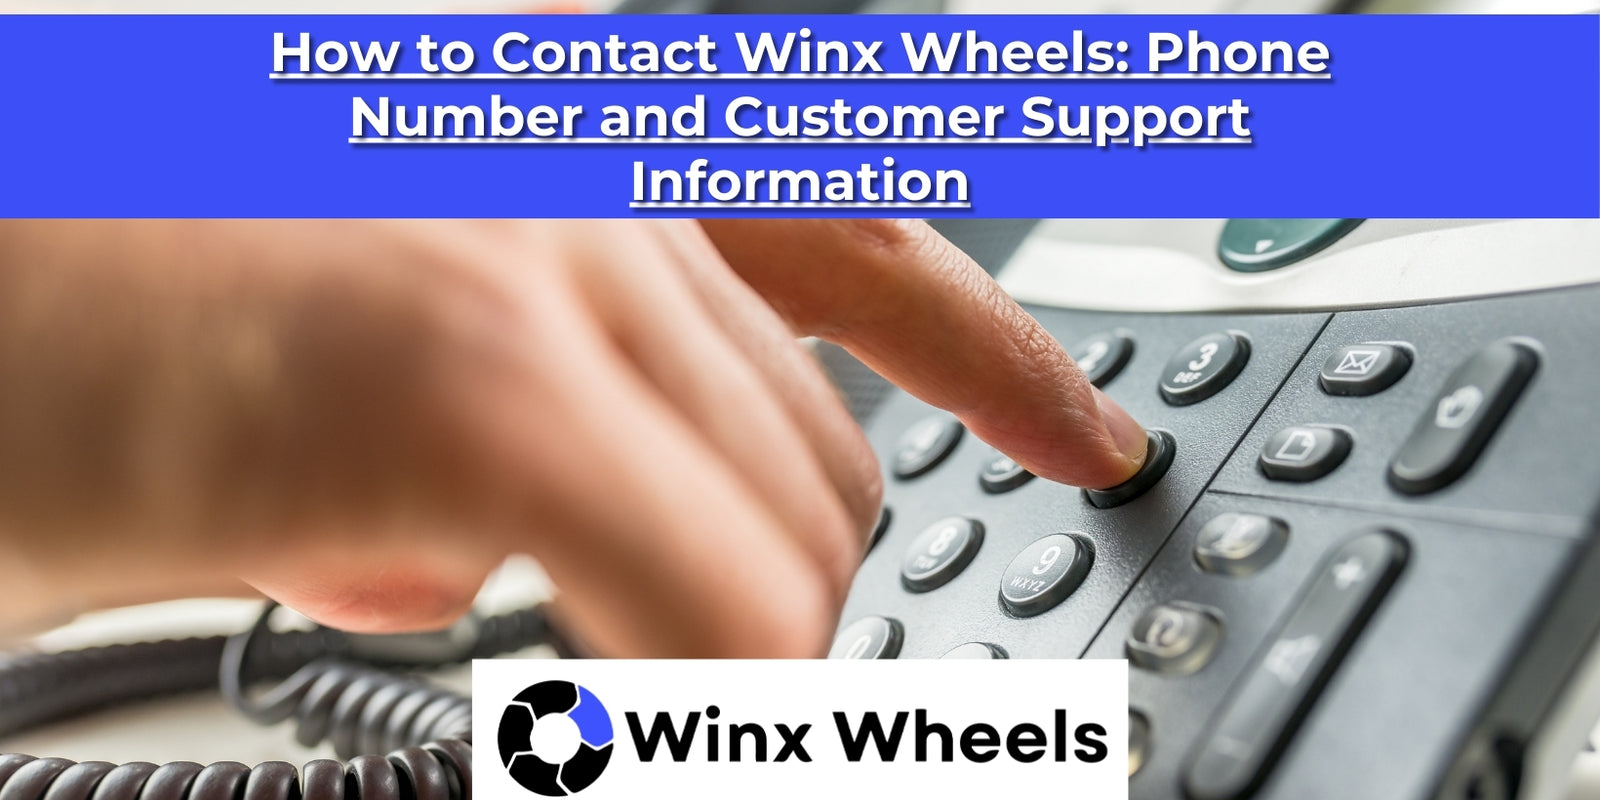 How to Contact Winx Wheels: Phone Number and Customer Support Information